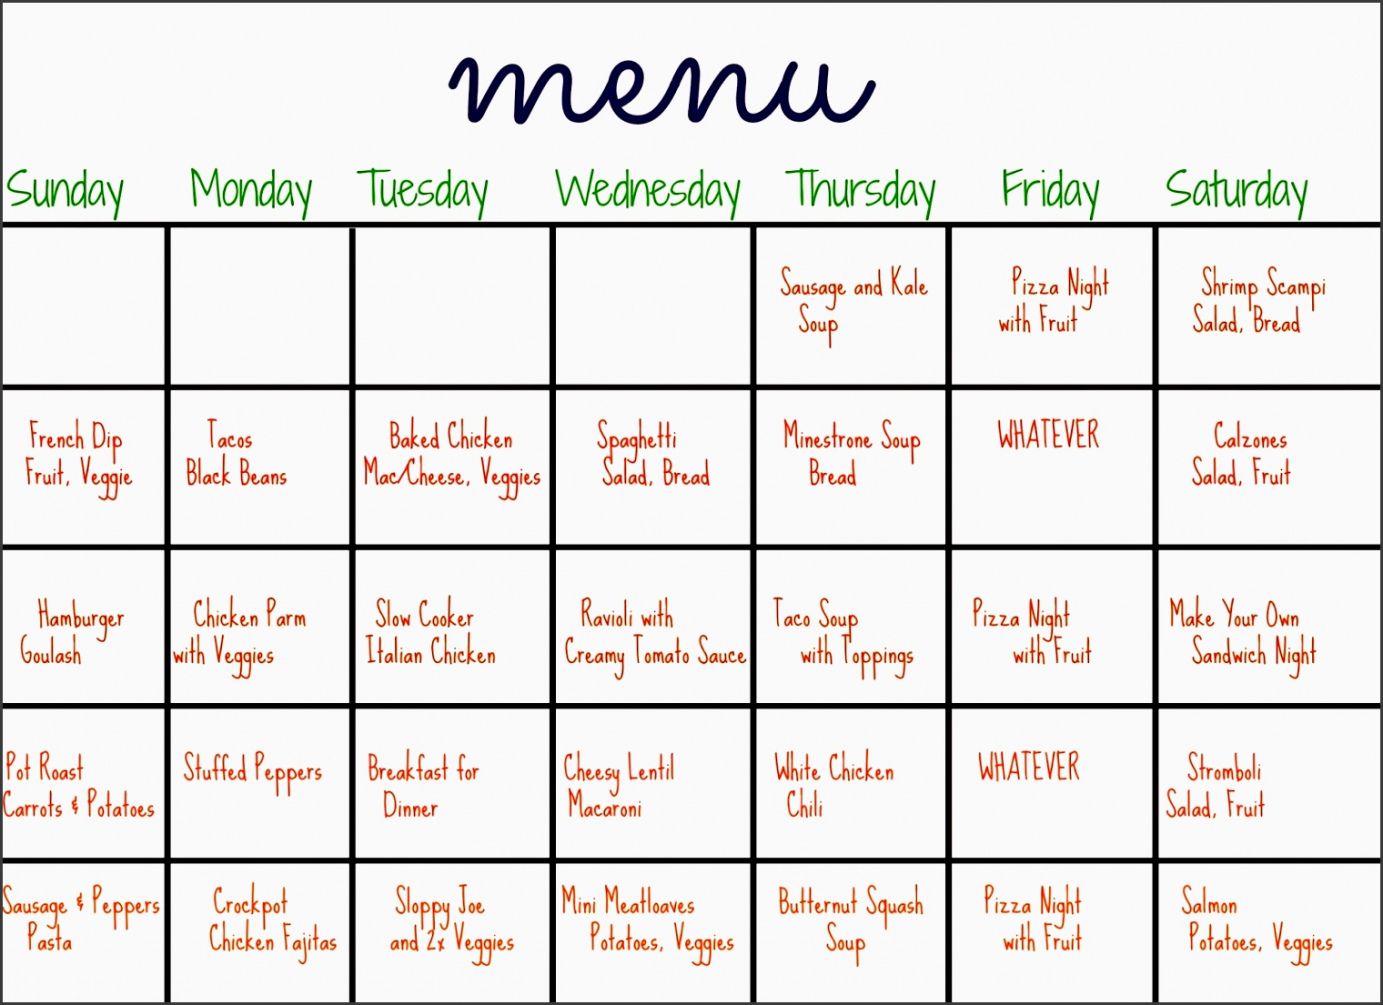 Free 5 Course Meal Menu Template Word Example